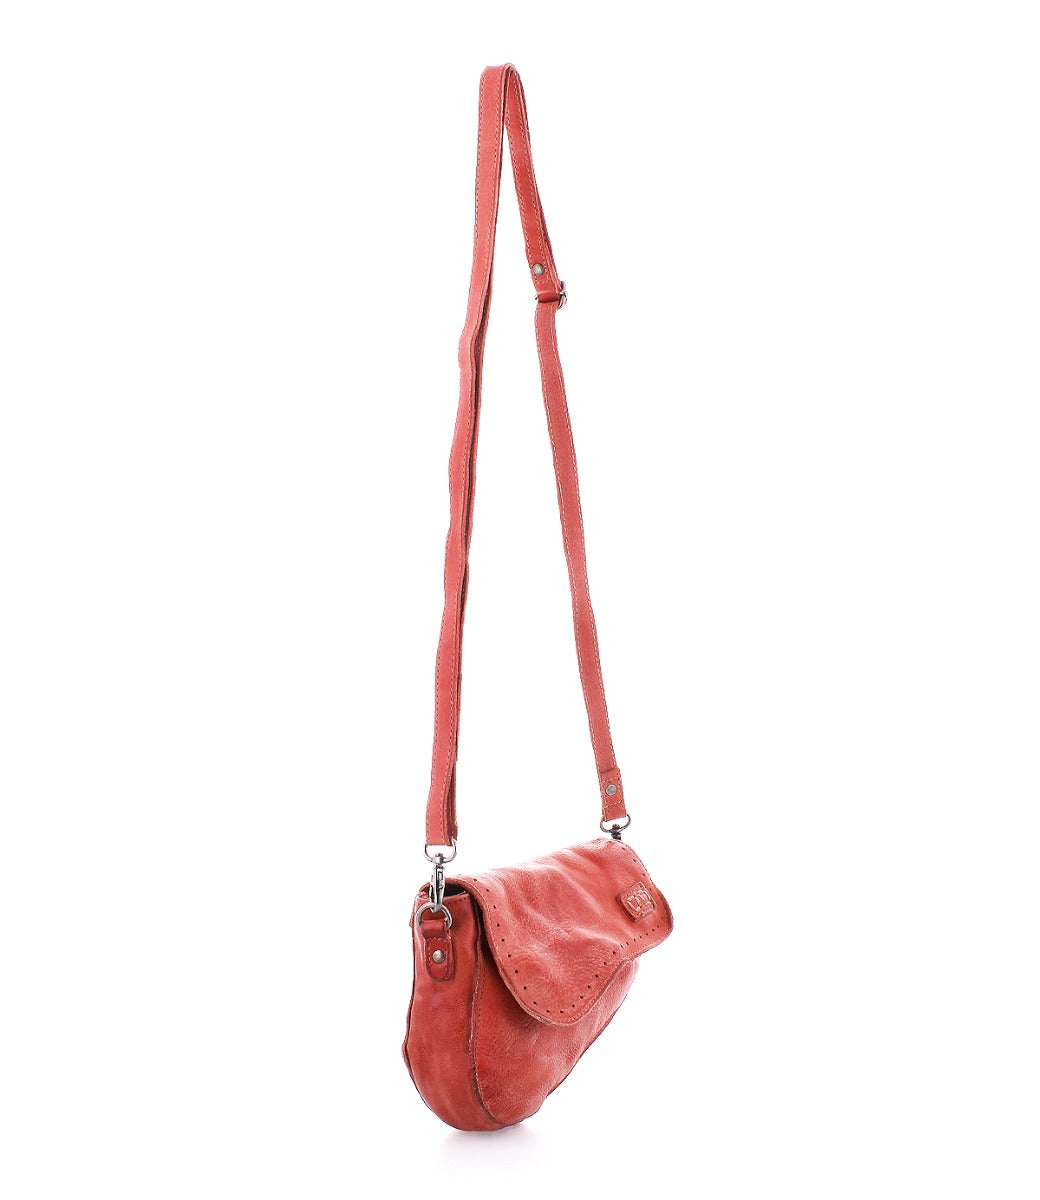 A small Priscilla crossbody bag with a strap by Bed Stu.